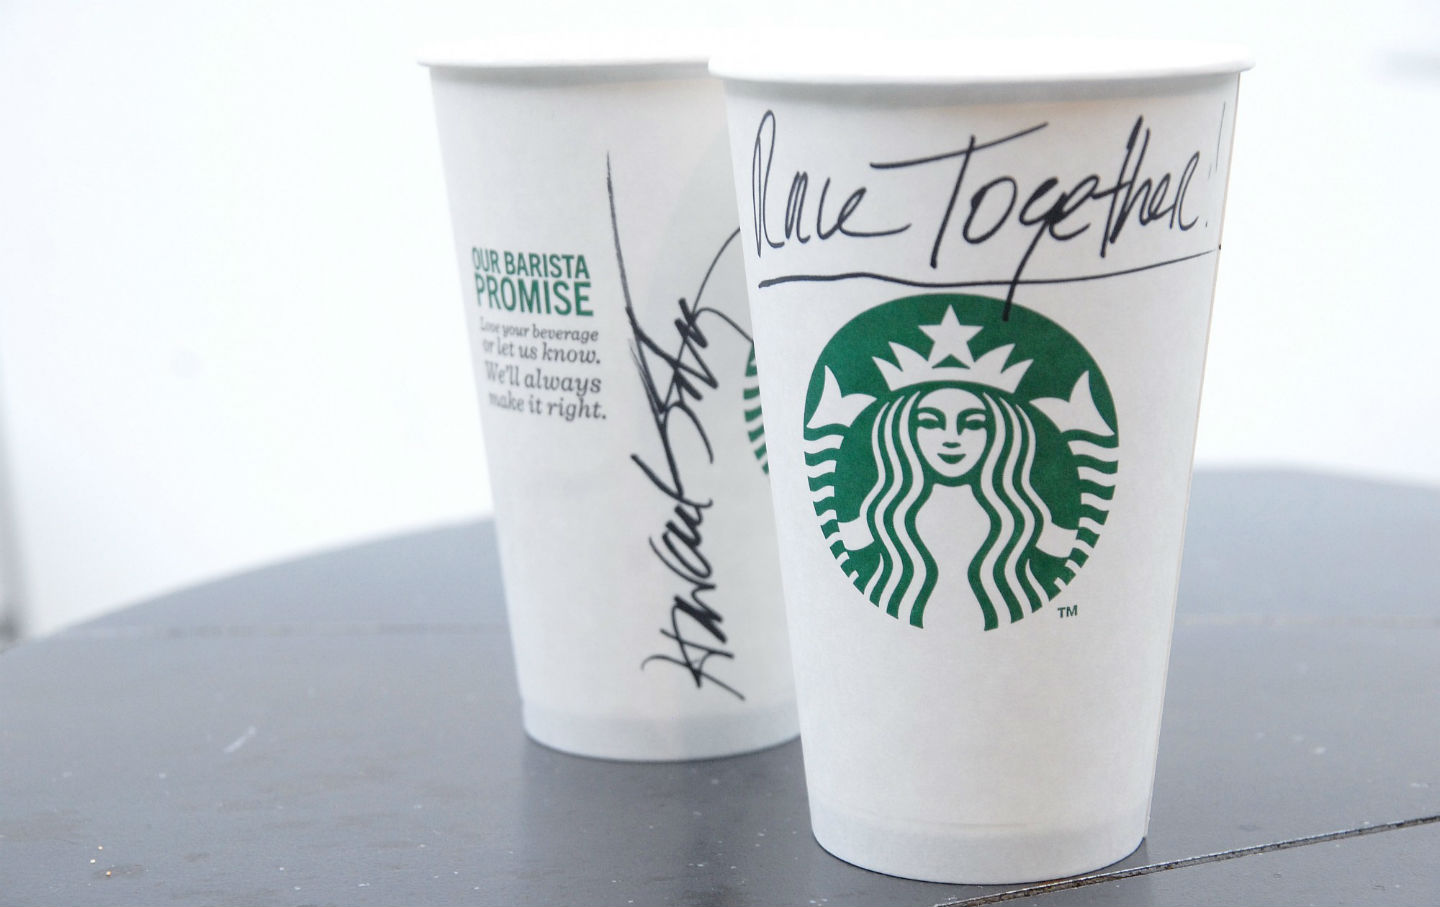 Starbucks Asks Employees to Solve Race Relations in America for No Extra Pay